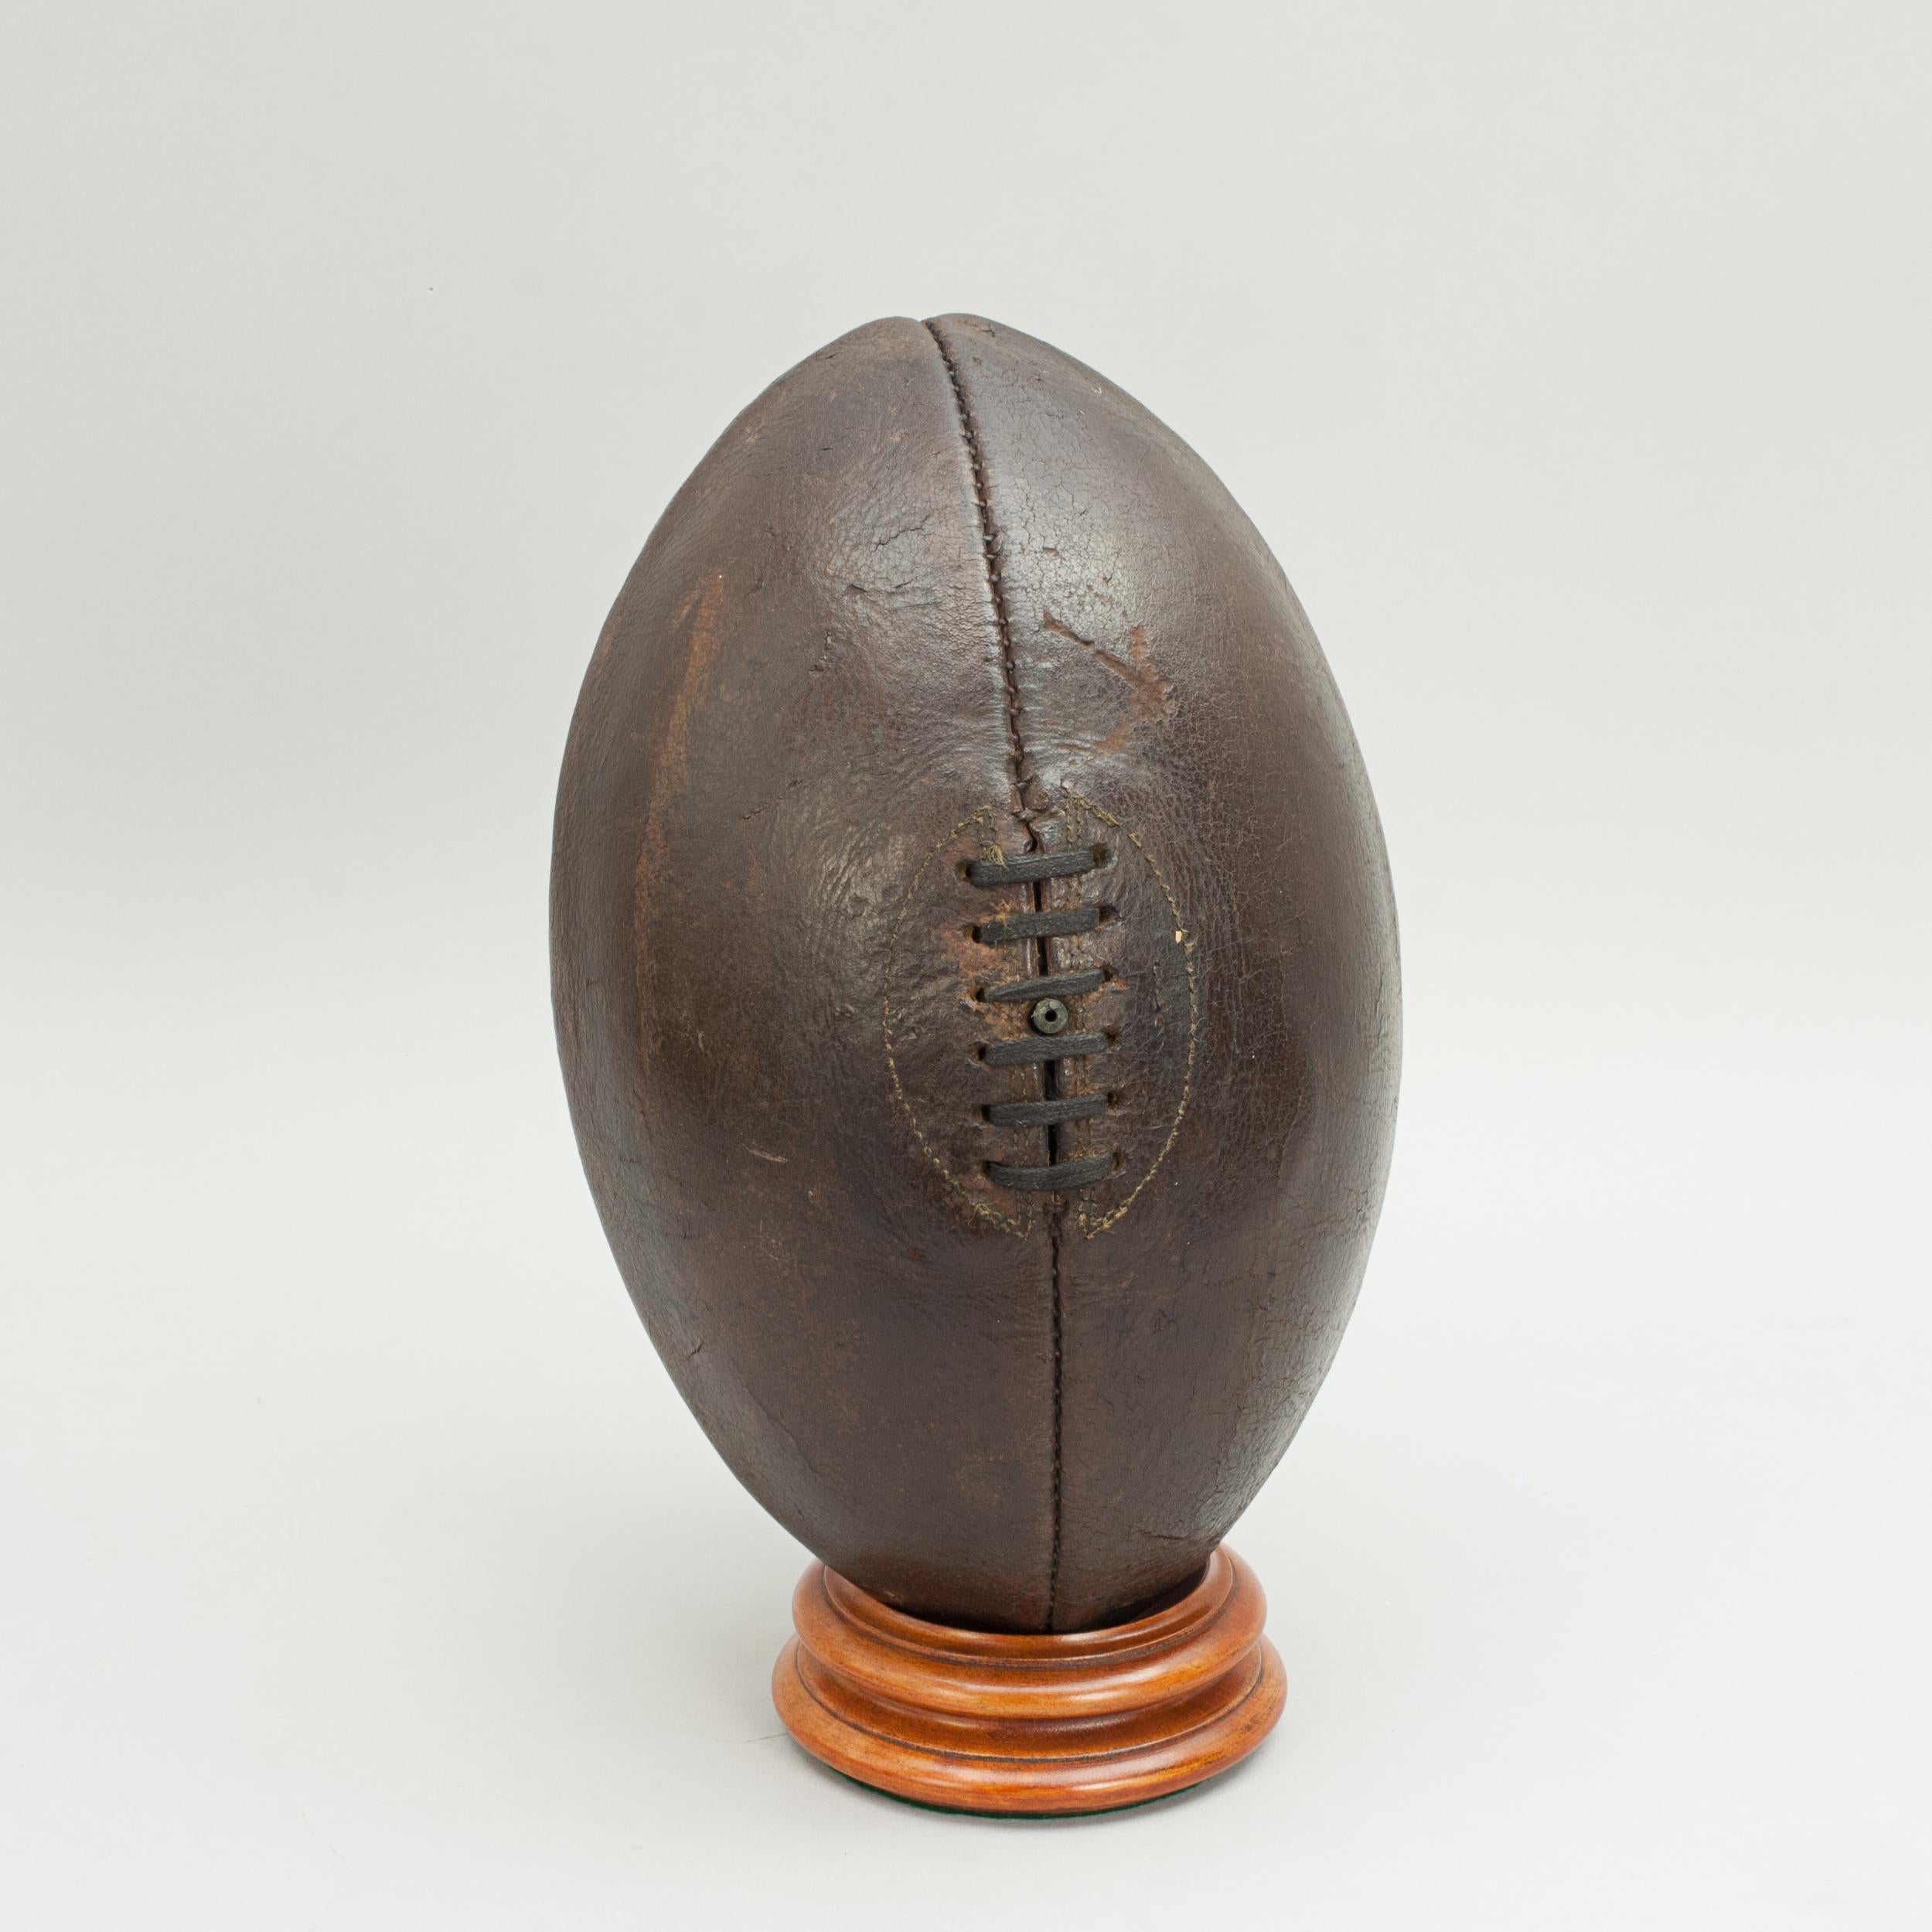 Early leather rugby ball.
A traditional four panel leather rugby ball with a lace-up slit to the top and valve for bladder inflation. The ball is with good dark color and patination.

Stand sold separately.